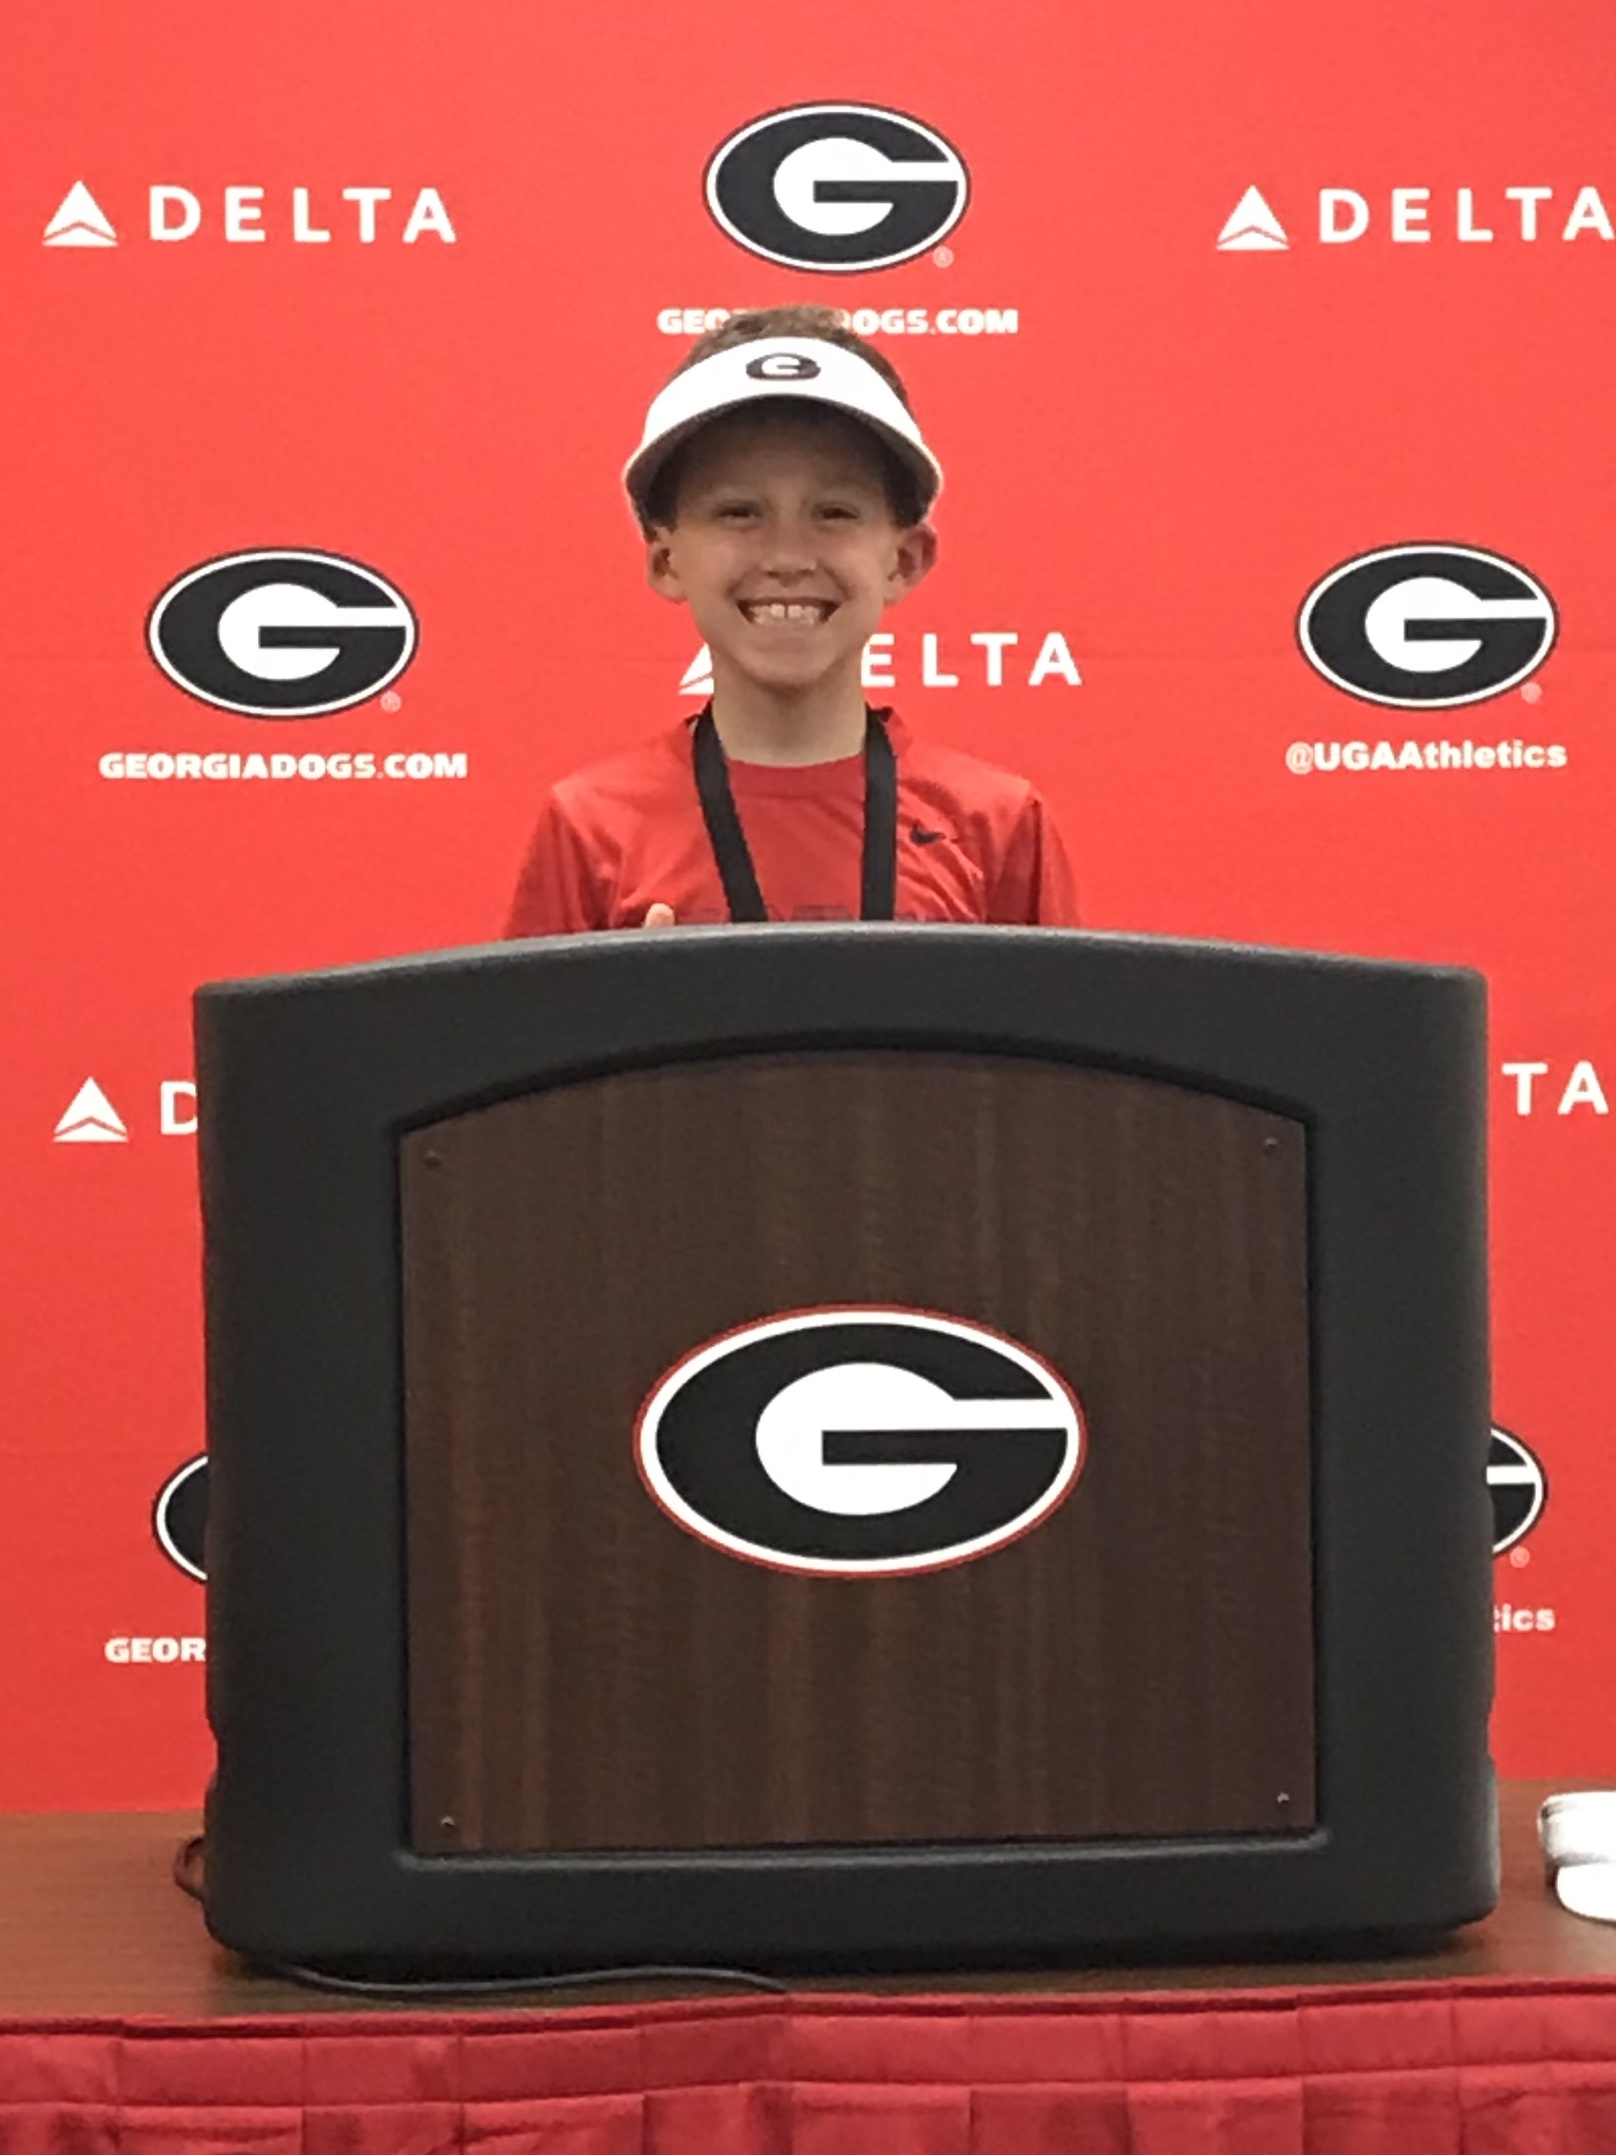 Jim Coleman (9) - Wide Receiver - At the podium, where Coach Smart gives his post game interviews, even wearing the visor to mimic Coach.